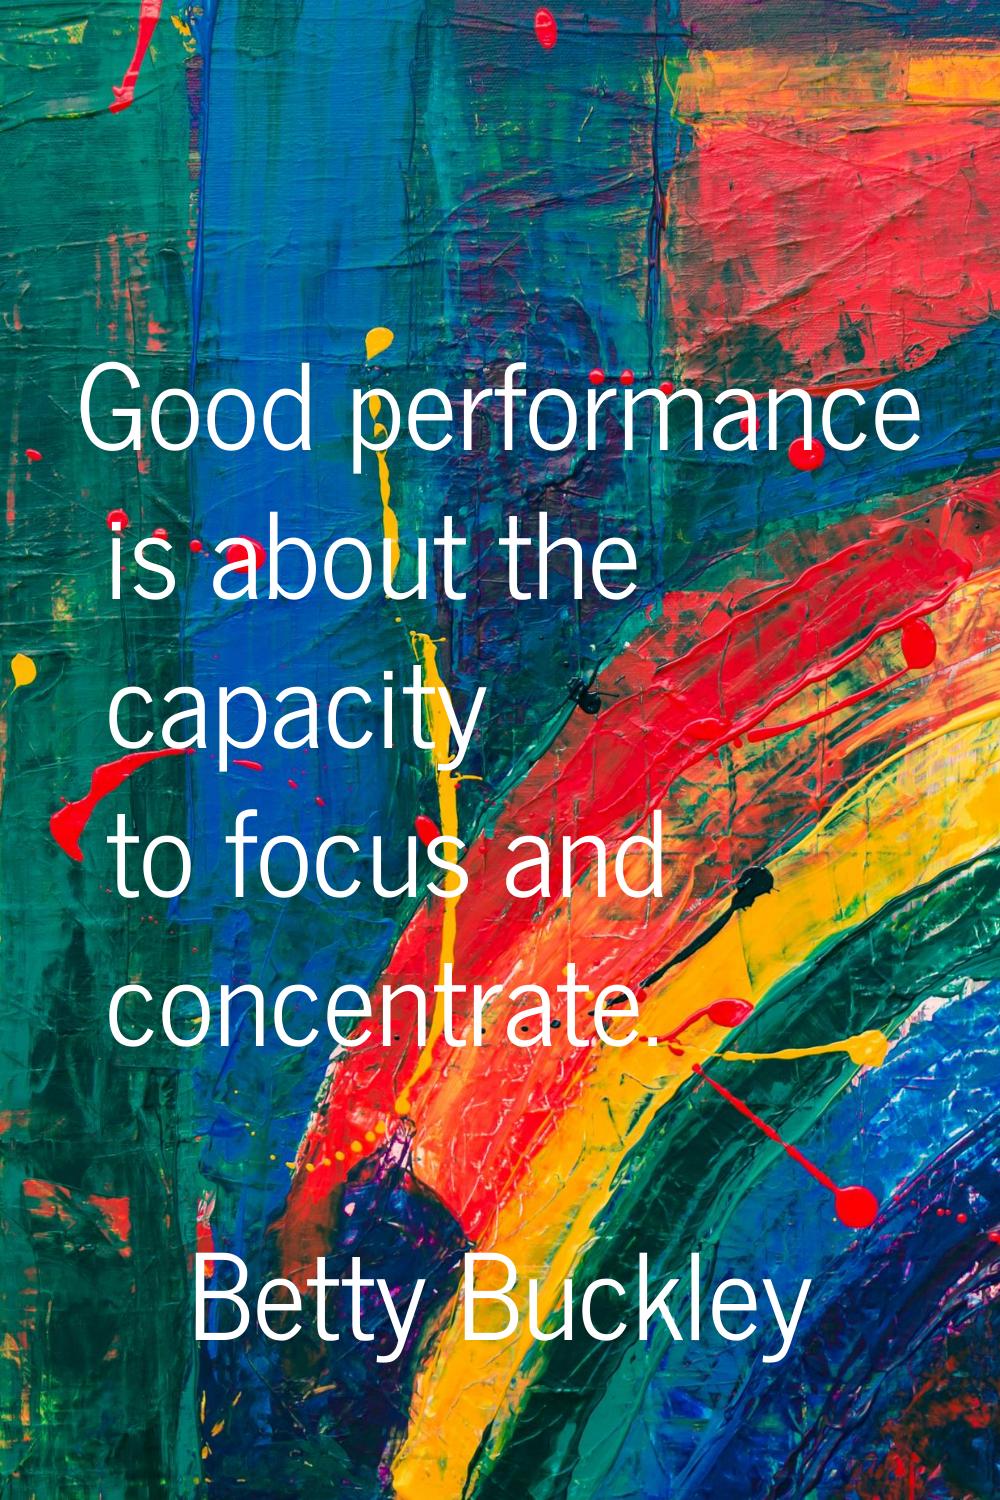 Good performance is about the capacity to focus and concentrate.